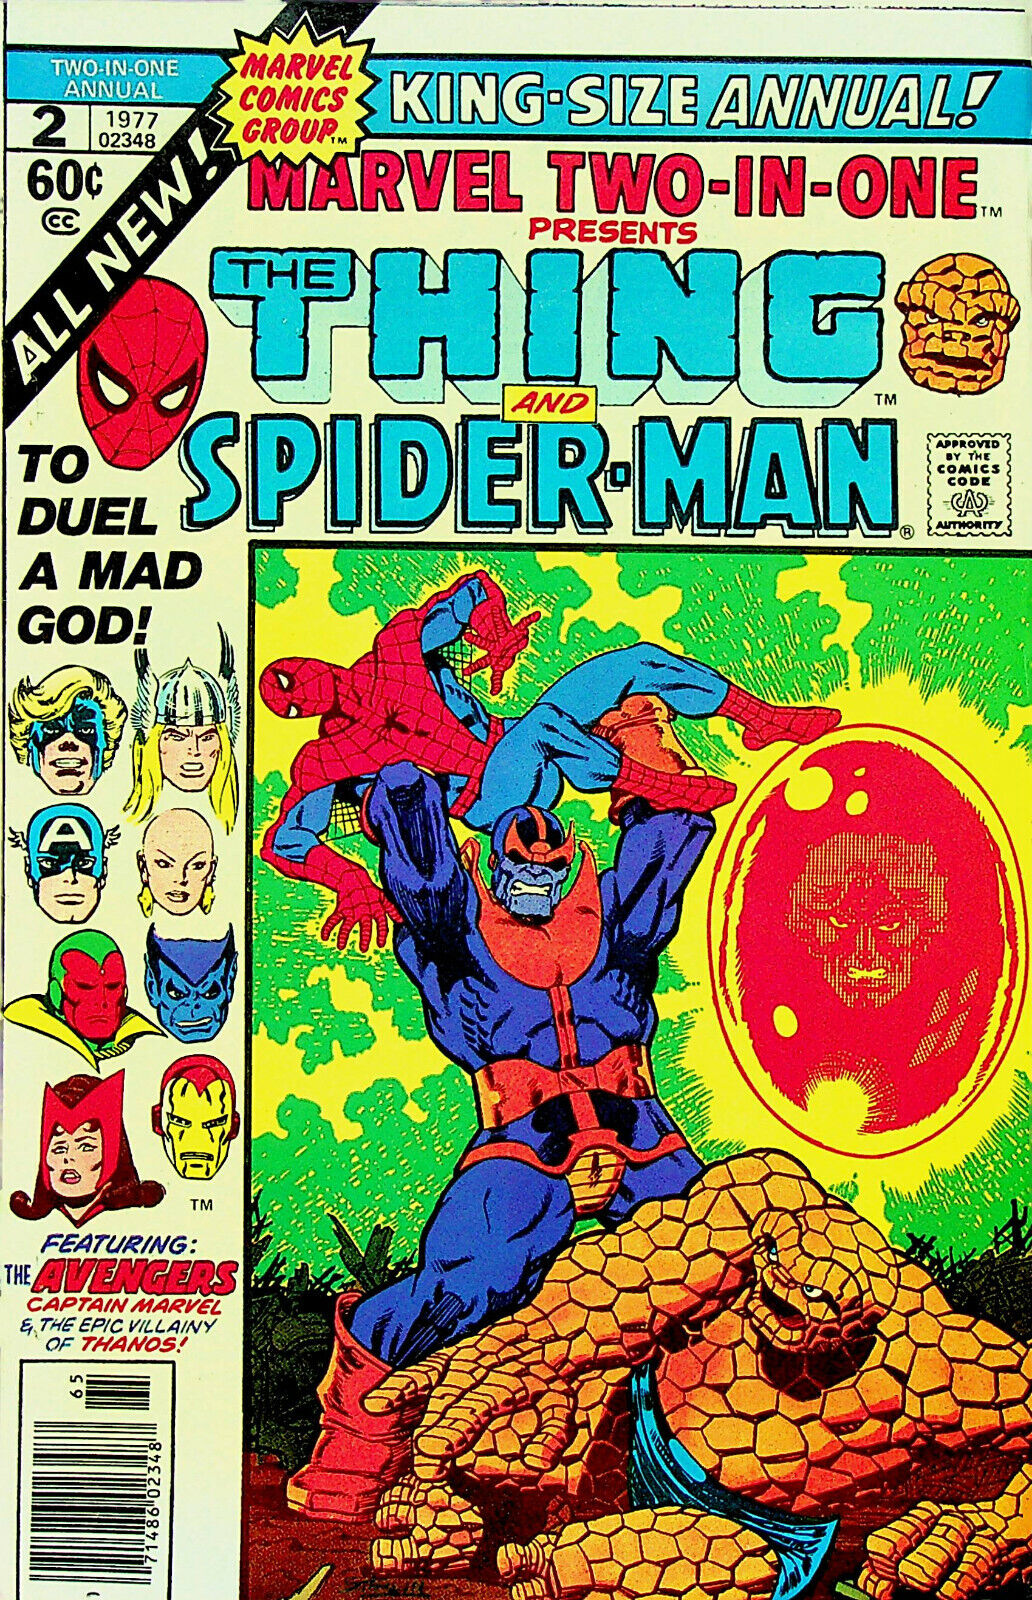 Marvel Two-In-One No. 2 - (1977, Marvel) - Very Fine/Near Mint